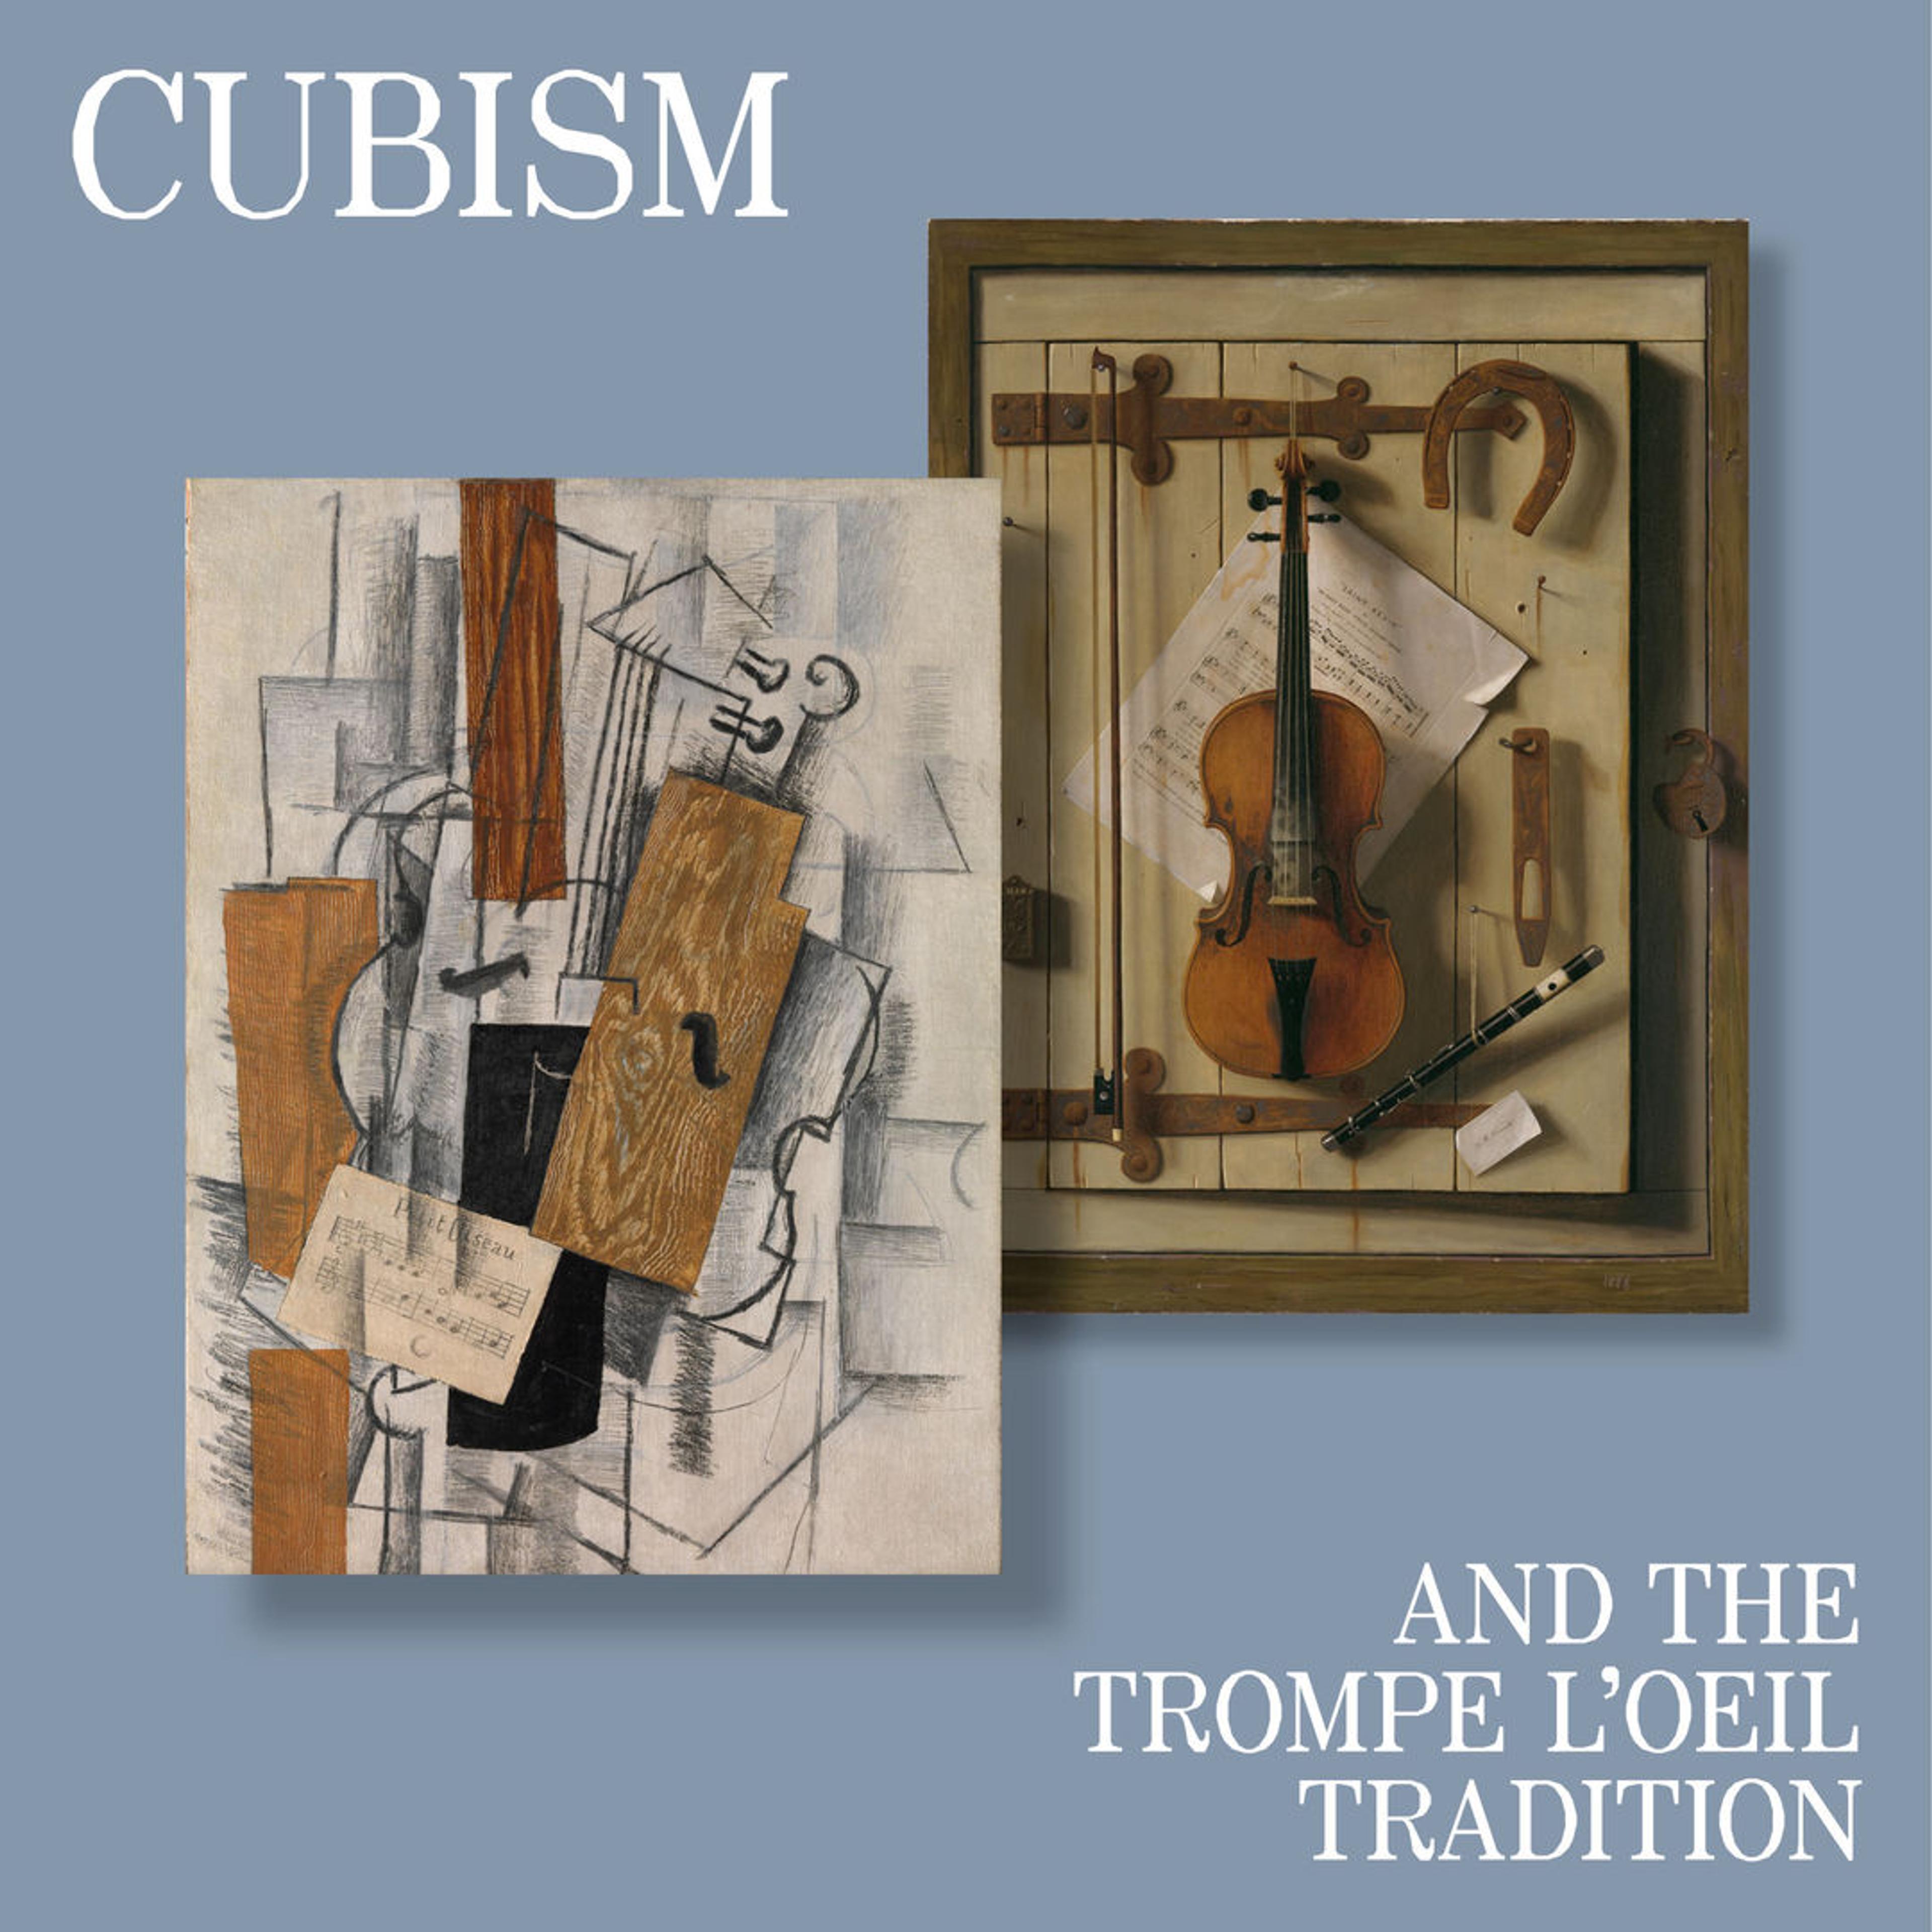 Cubism and the Trompe l'Oeil Tradition - The Metropolitan Museum of Art